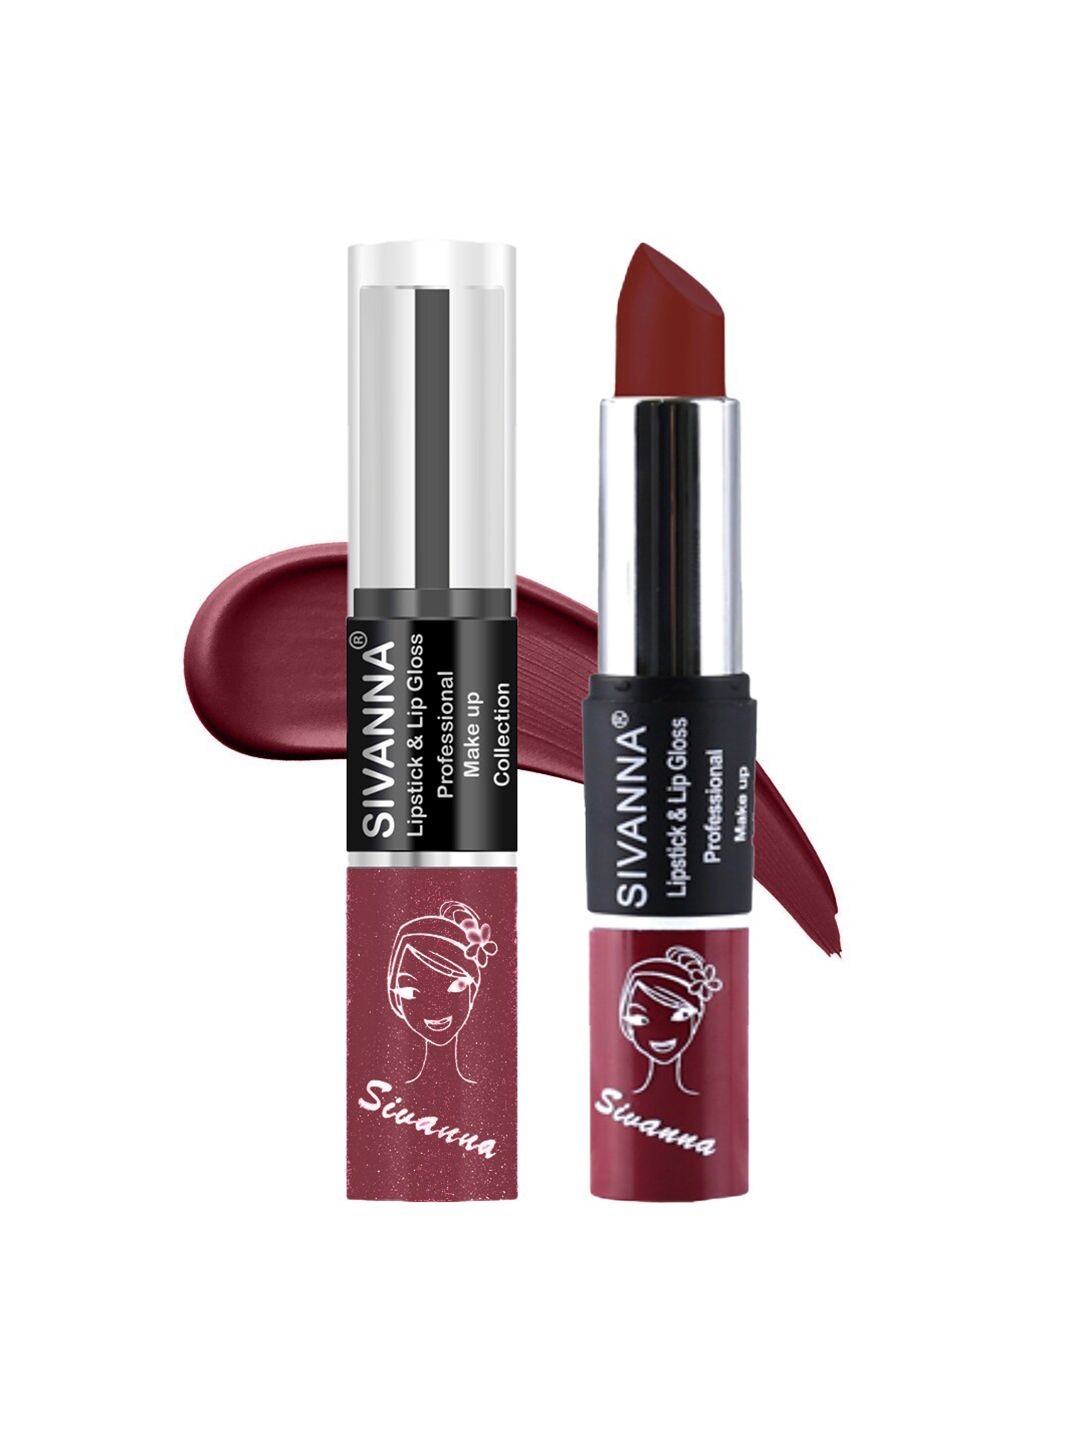 Sivanna Colors 2-in-1 Professional Makeup Lipstick & Lip Gloss - DK061 15 Price in India